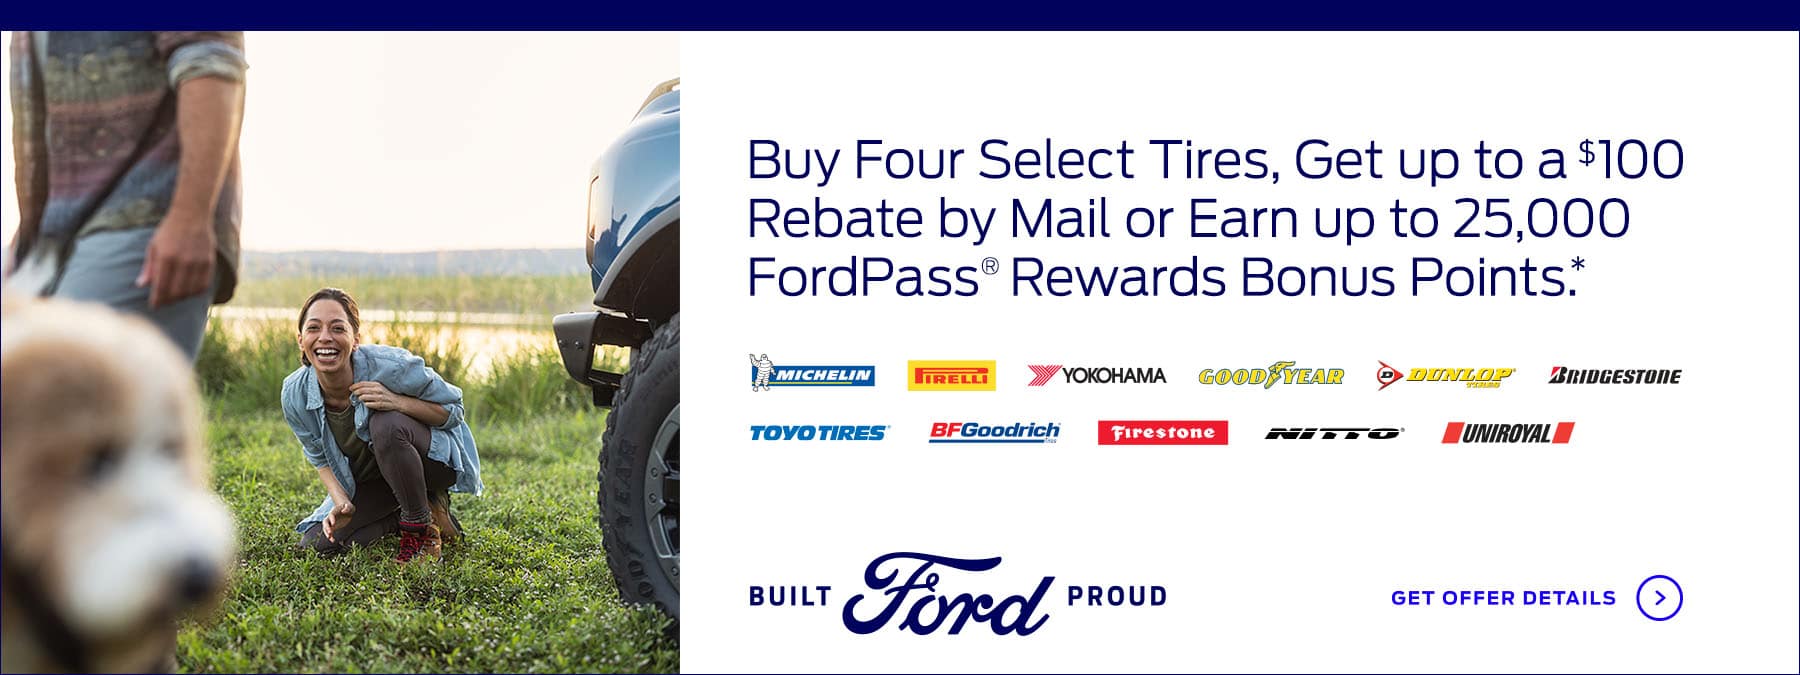 Buy four select tires, get up to a $100 rebate by mail or earn up to 25,000 FordPass® Rewards bonus Points.